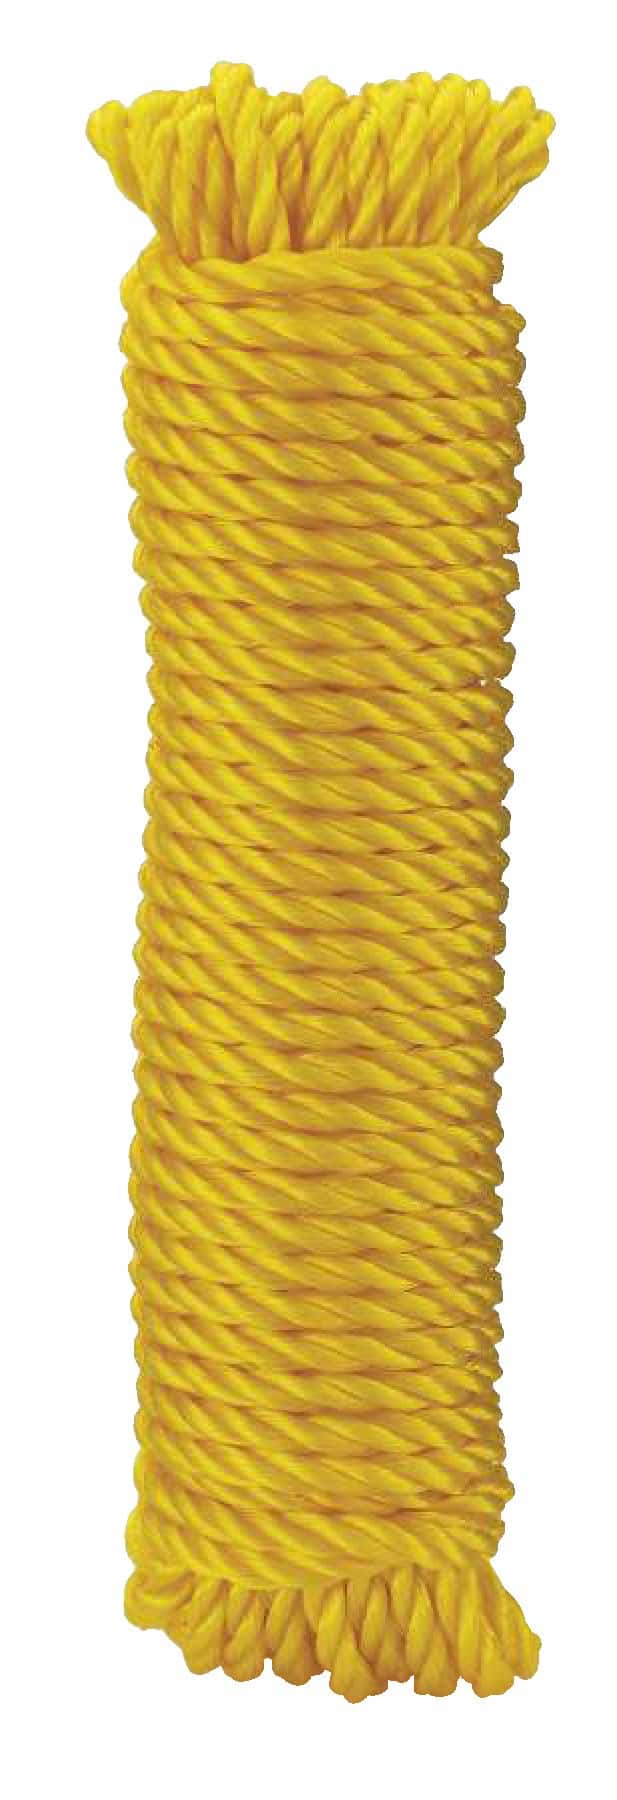 KingCord Polypropylene Waterproof Twisted Rope, Yellow, 1/4-in x